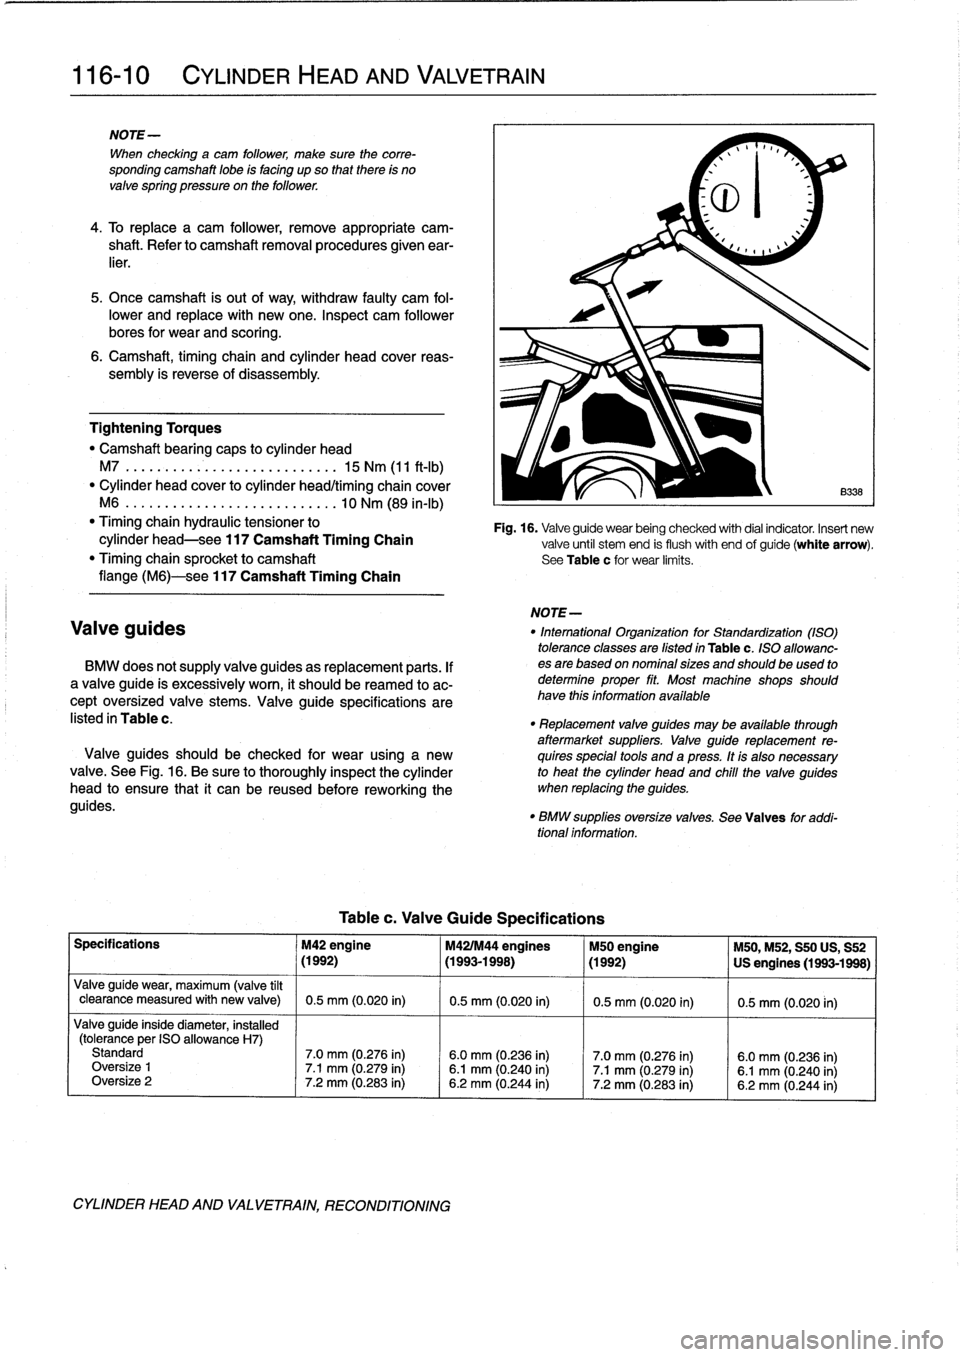 BMW M3 1993 E36 Owners Manual 
116-
1
0

	

CYLINDER
HEADAND
VALVETRAIN

NOTE-

When
checking
a
cam
follower,
make
sure
the
corre-
sponding
camshaft
lobe
ís
facing
up
so
that
there
is
no
valve
spring
pressure
on
the
follower
.

4